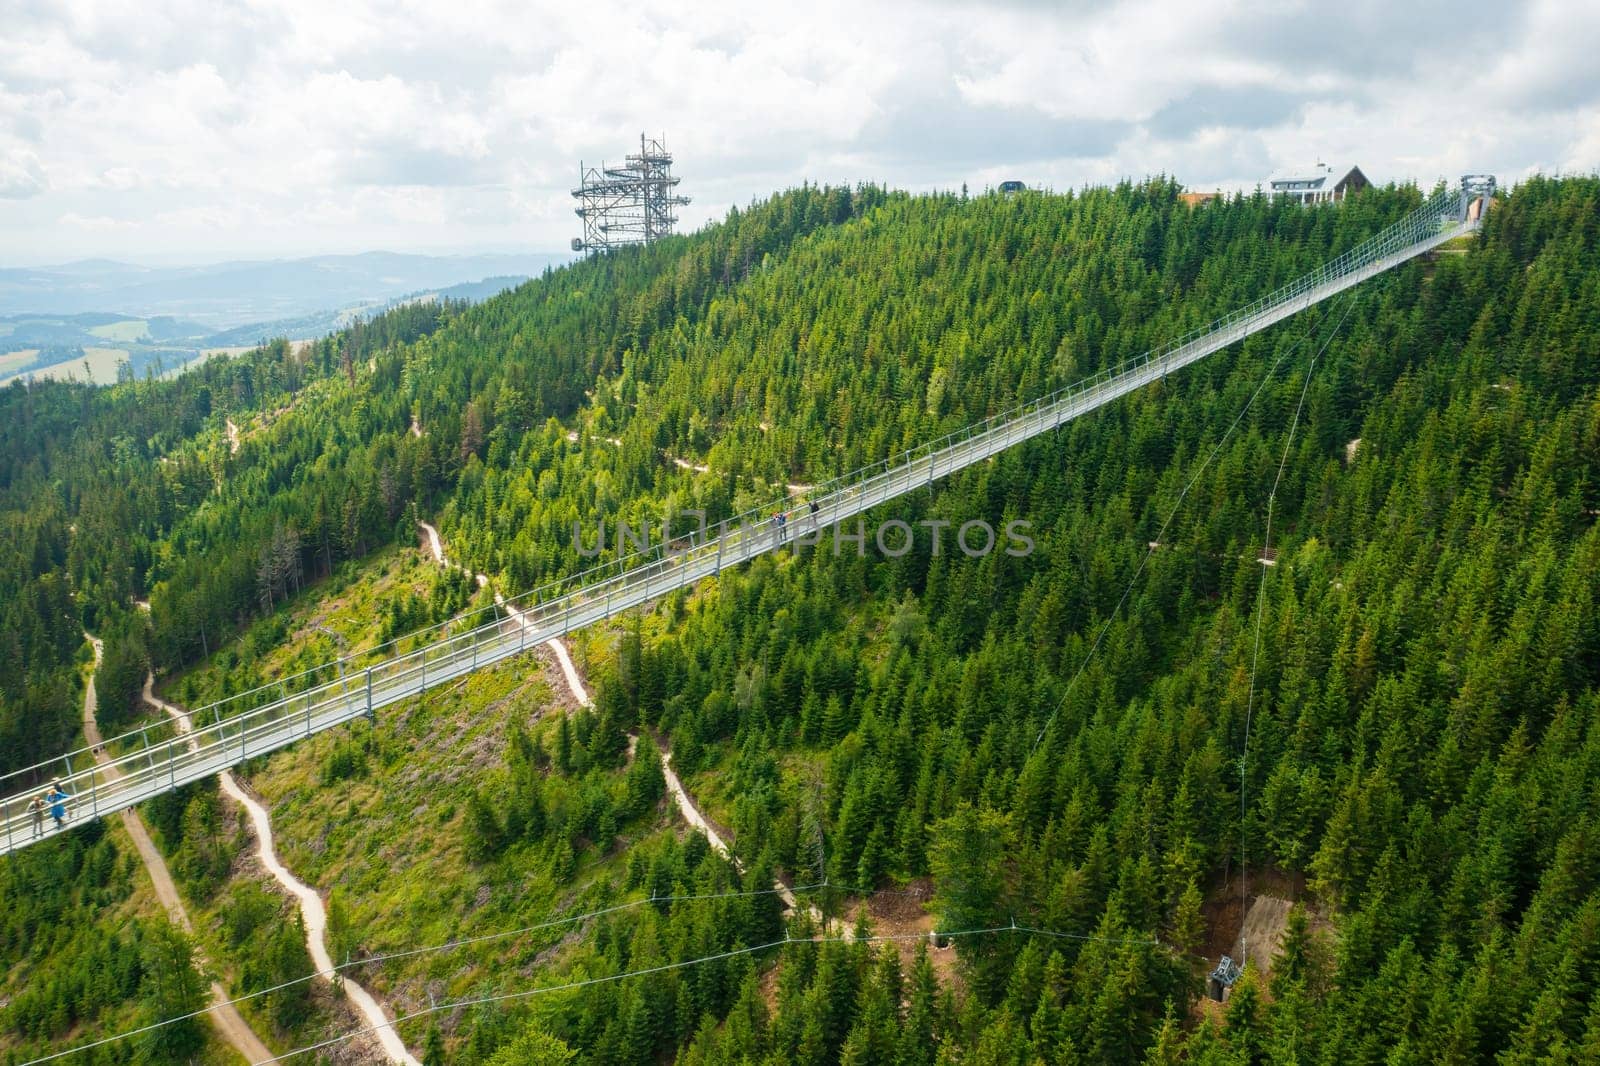 Aerial view of the worlds longest 721 meter suspension footbridge Sky bridge and observation tower the Sky walk in the forest, between mountains, Dolni Morava Ski Resort, Czech Republic.